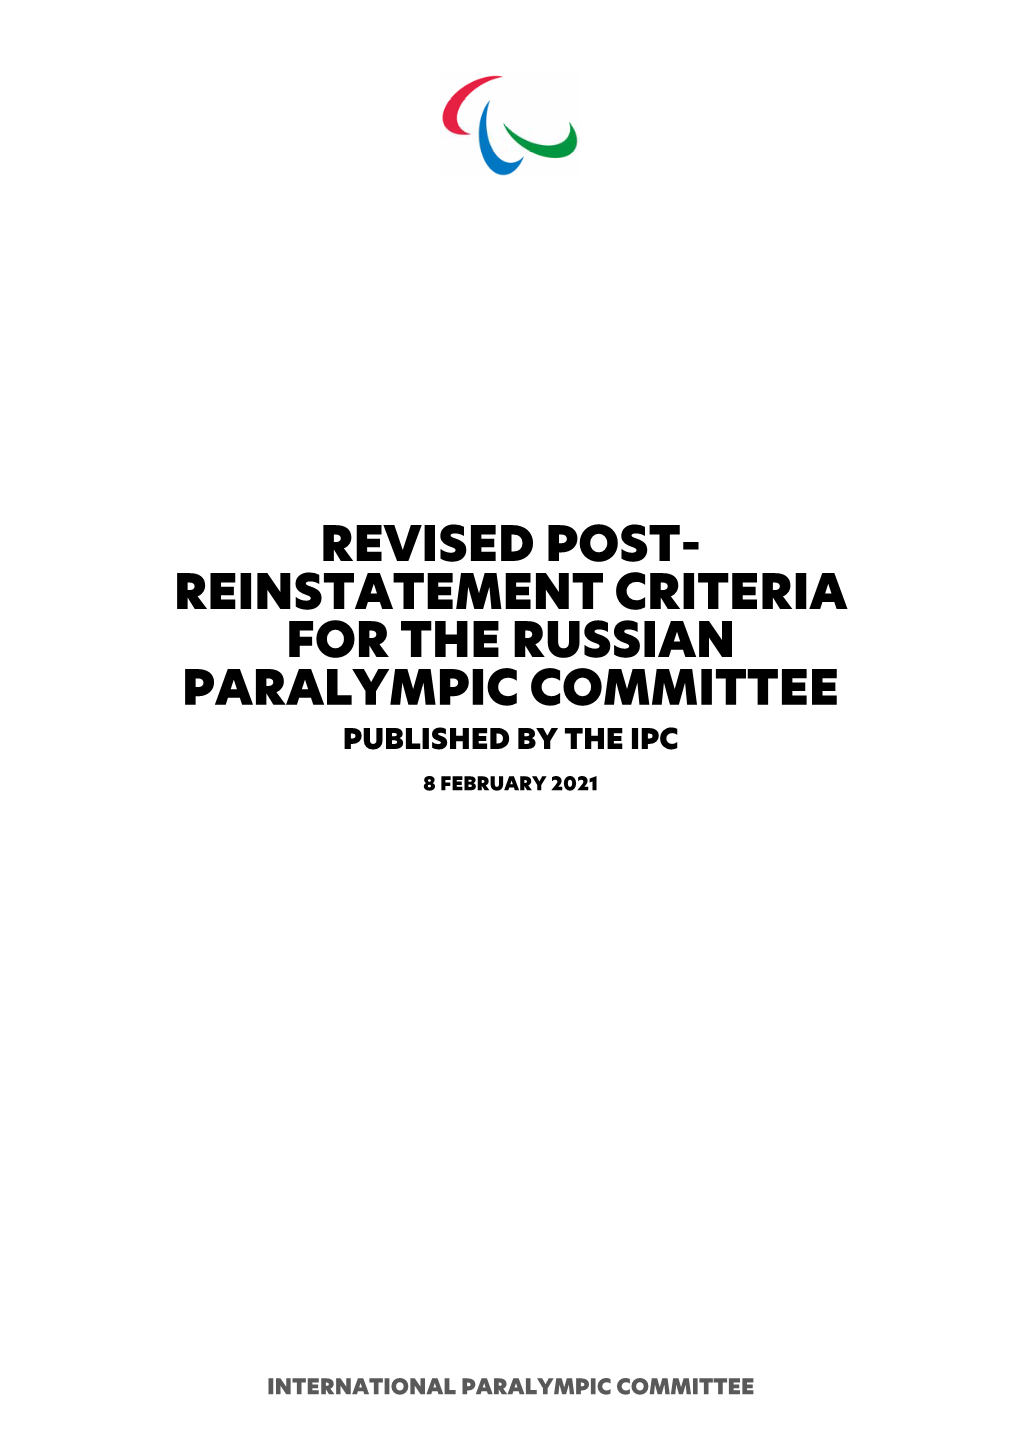 Revised Post- Reinstatement Criteria for the Russian Paralympic Committee Published by the Ipc